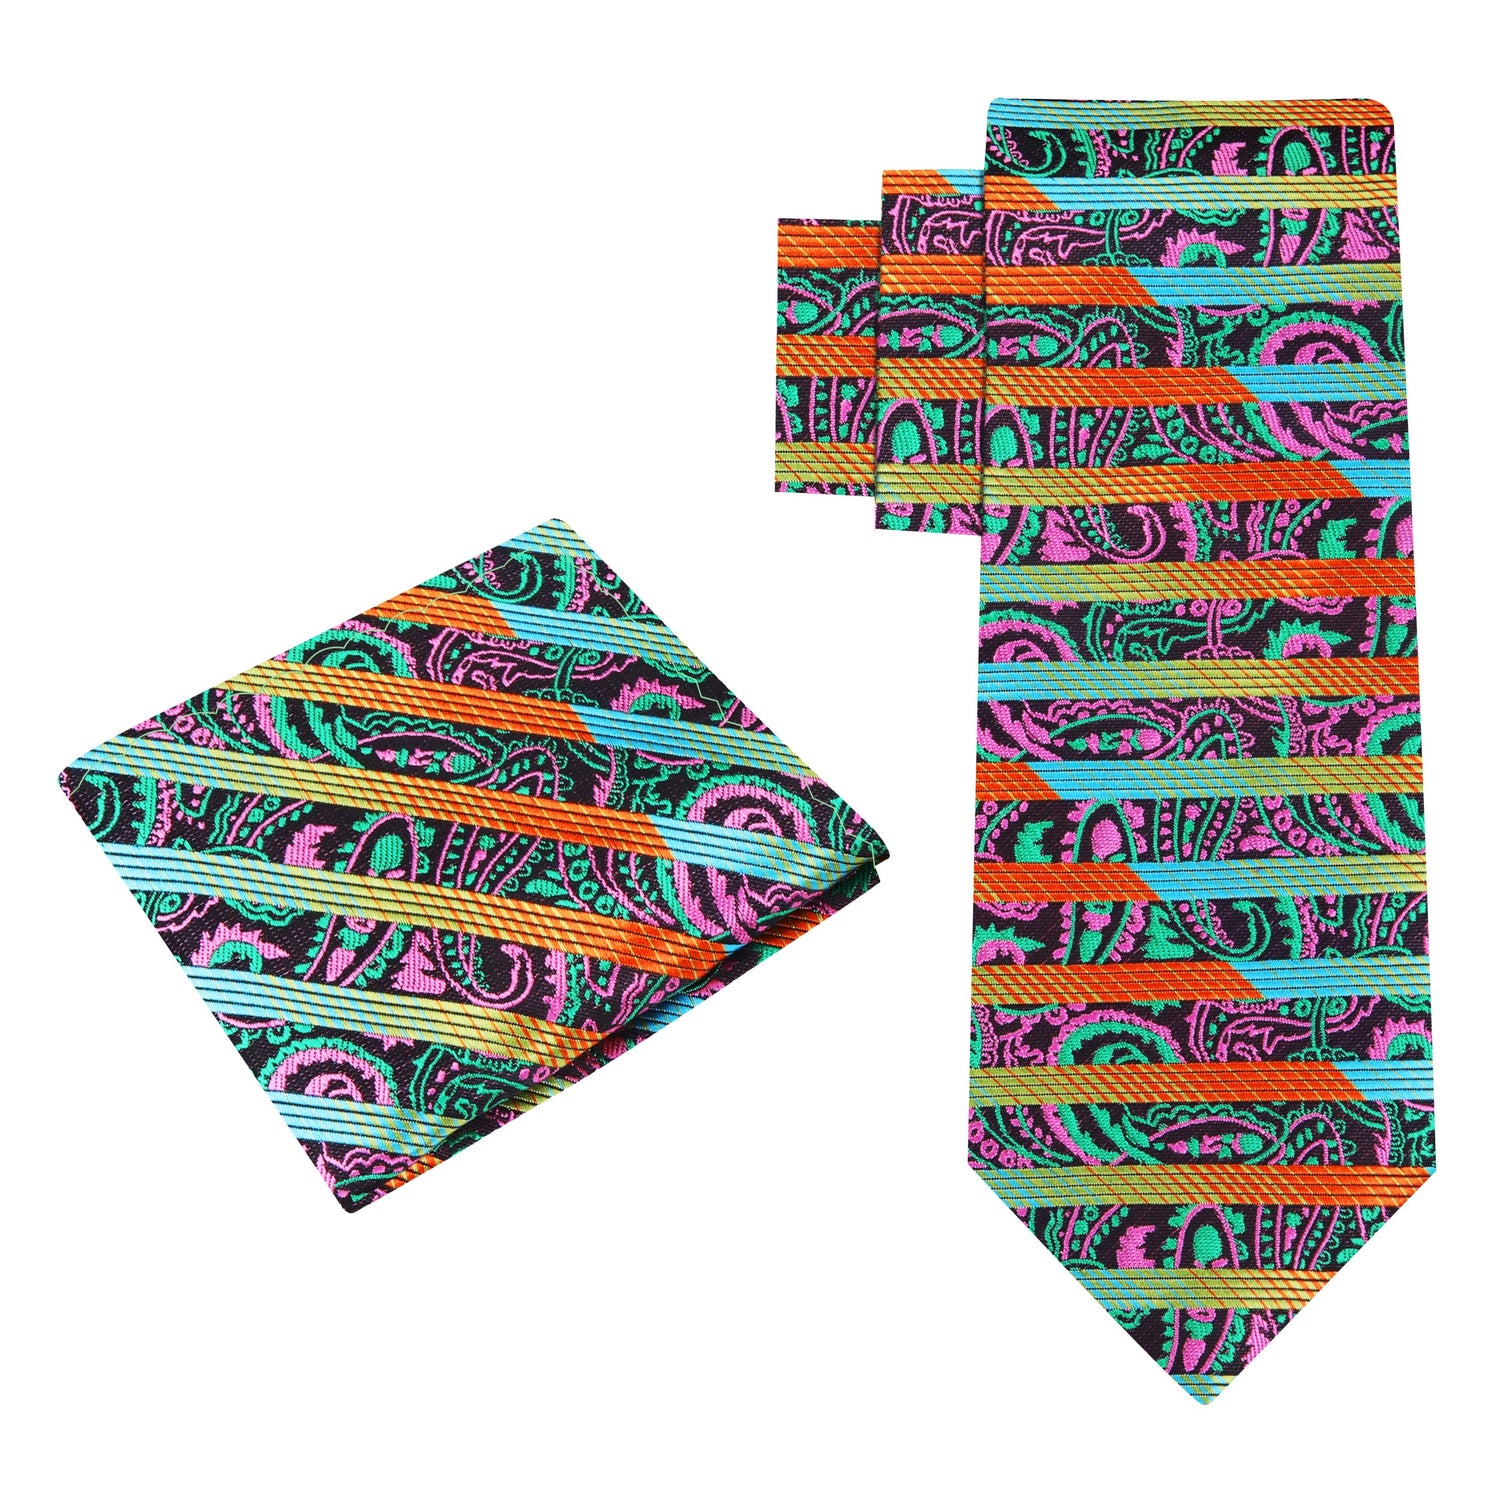 Alt View: Necktie and Square with a Orange, Green, Blue, Yellow, Pink, Brown Stripe, Abstract, Paisley Pattern